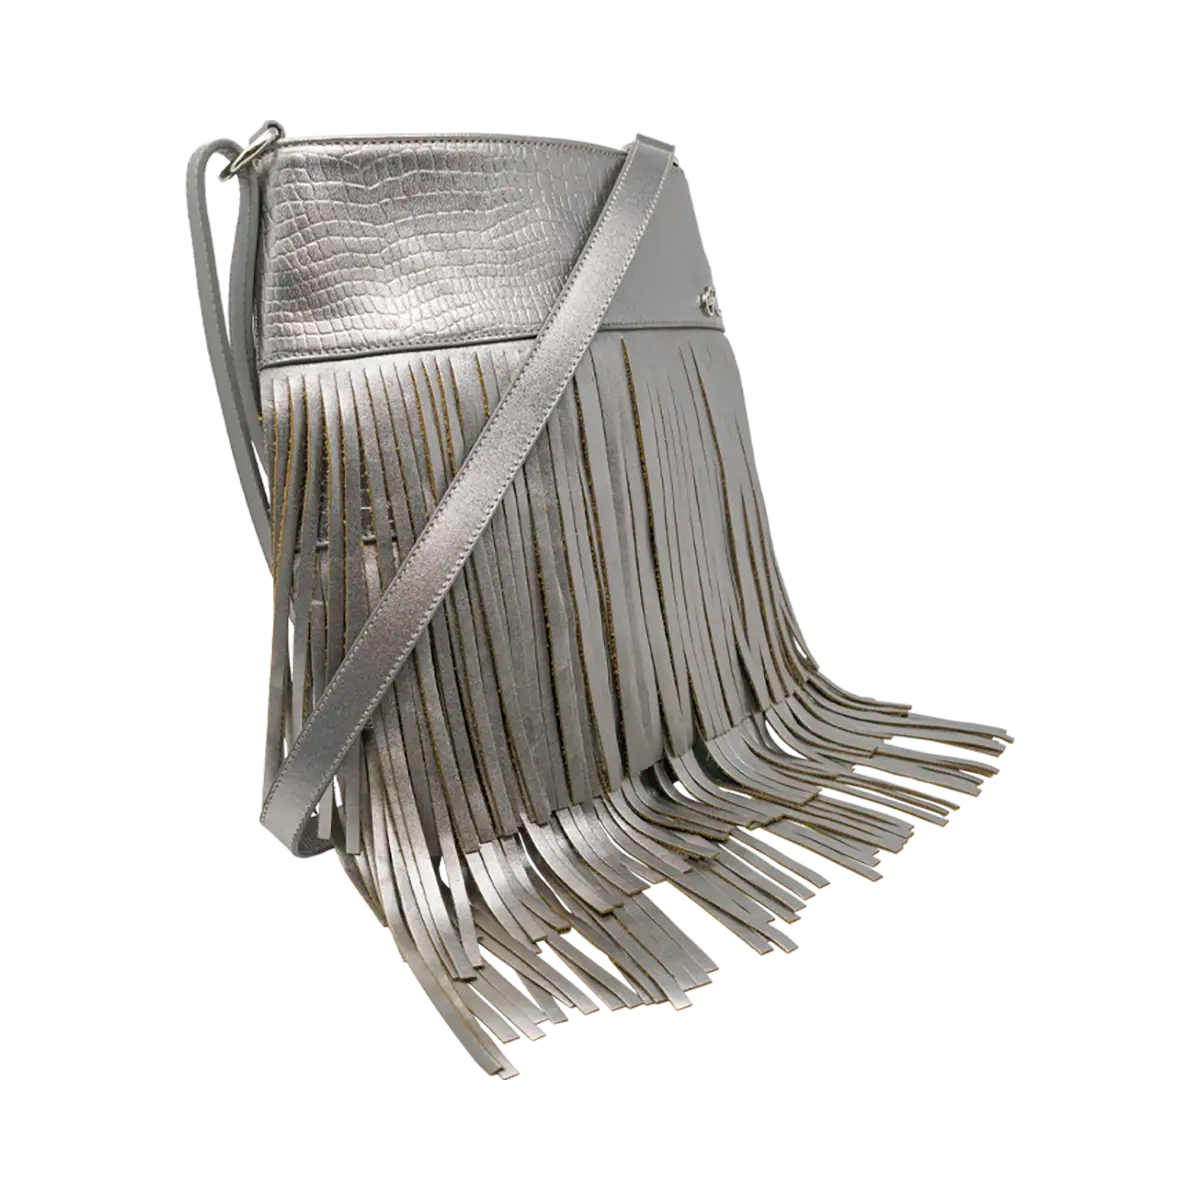 silver leather shoulder bag with 3 layers of fringe. Fashion accessories, for women in San Diego, CA.